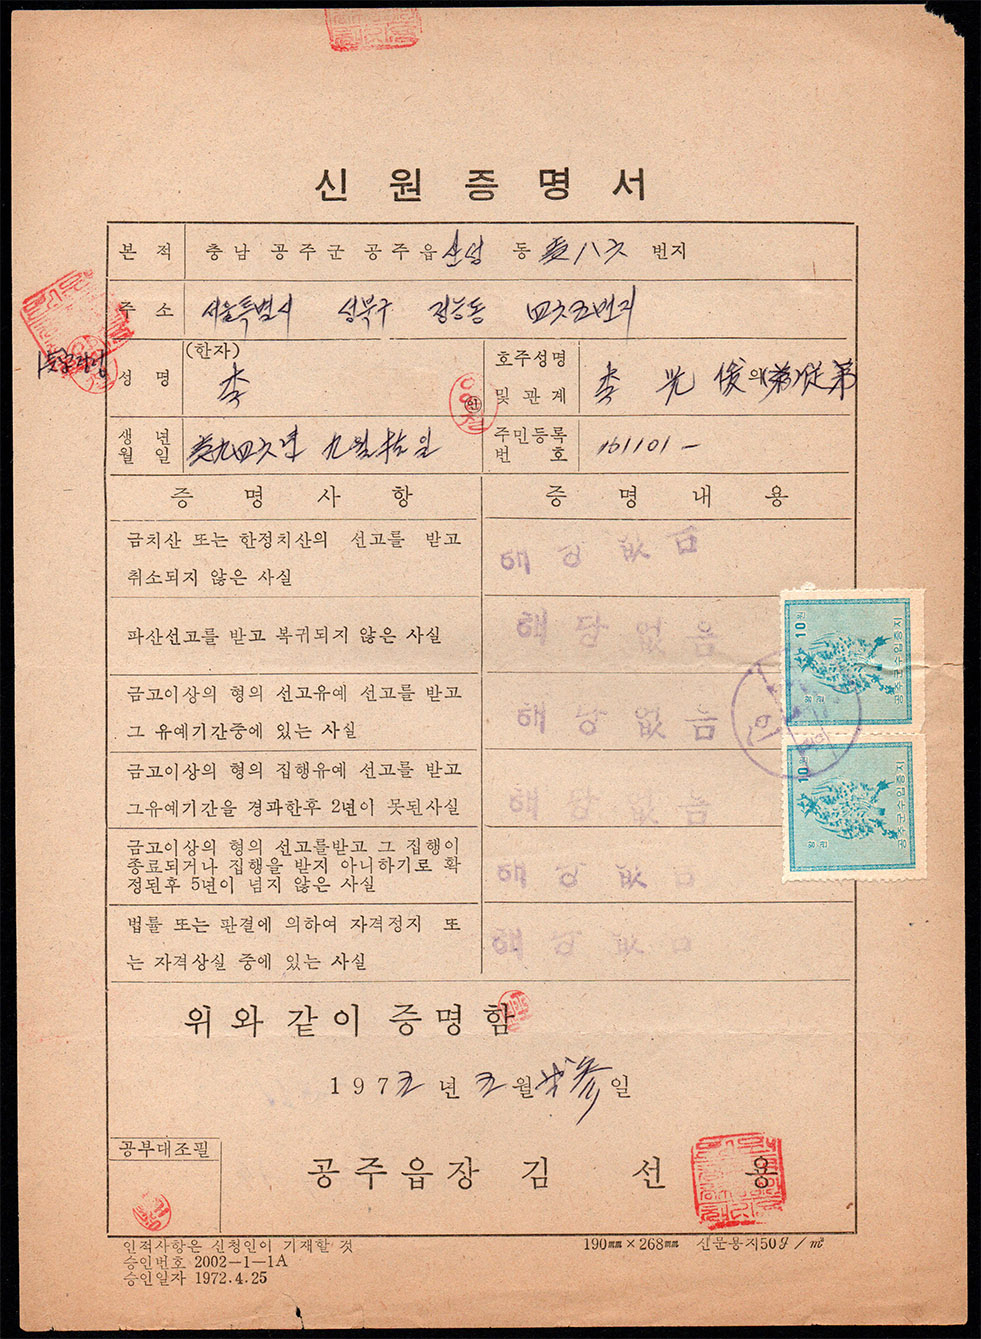 Gongju_1975_Written_Character_Reference_981px